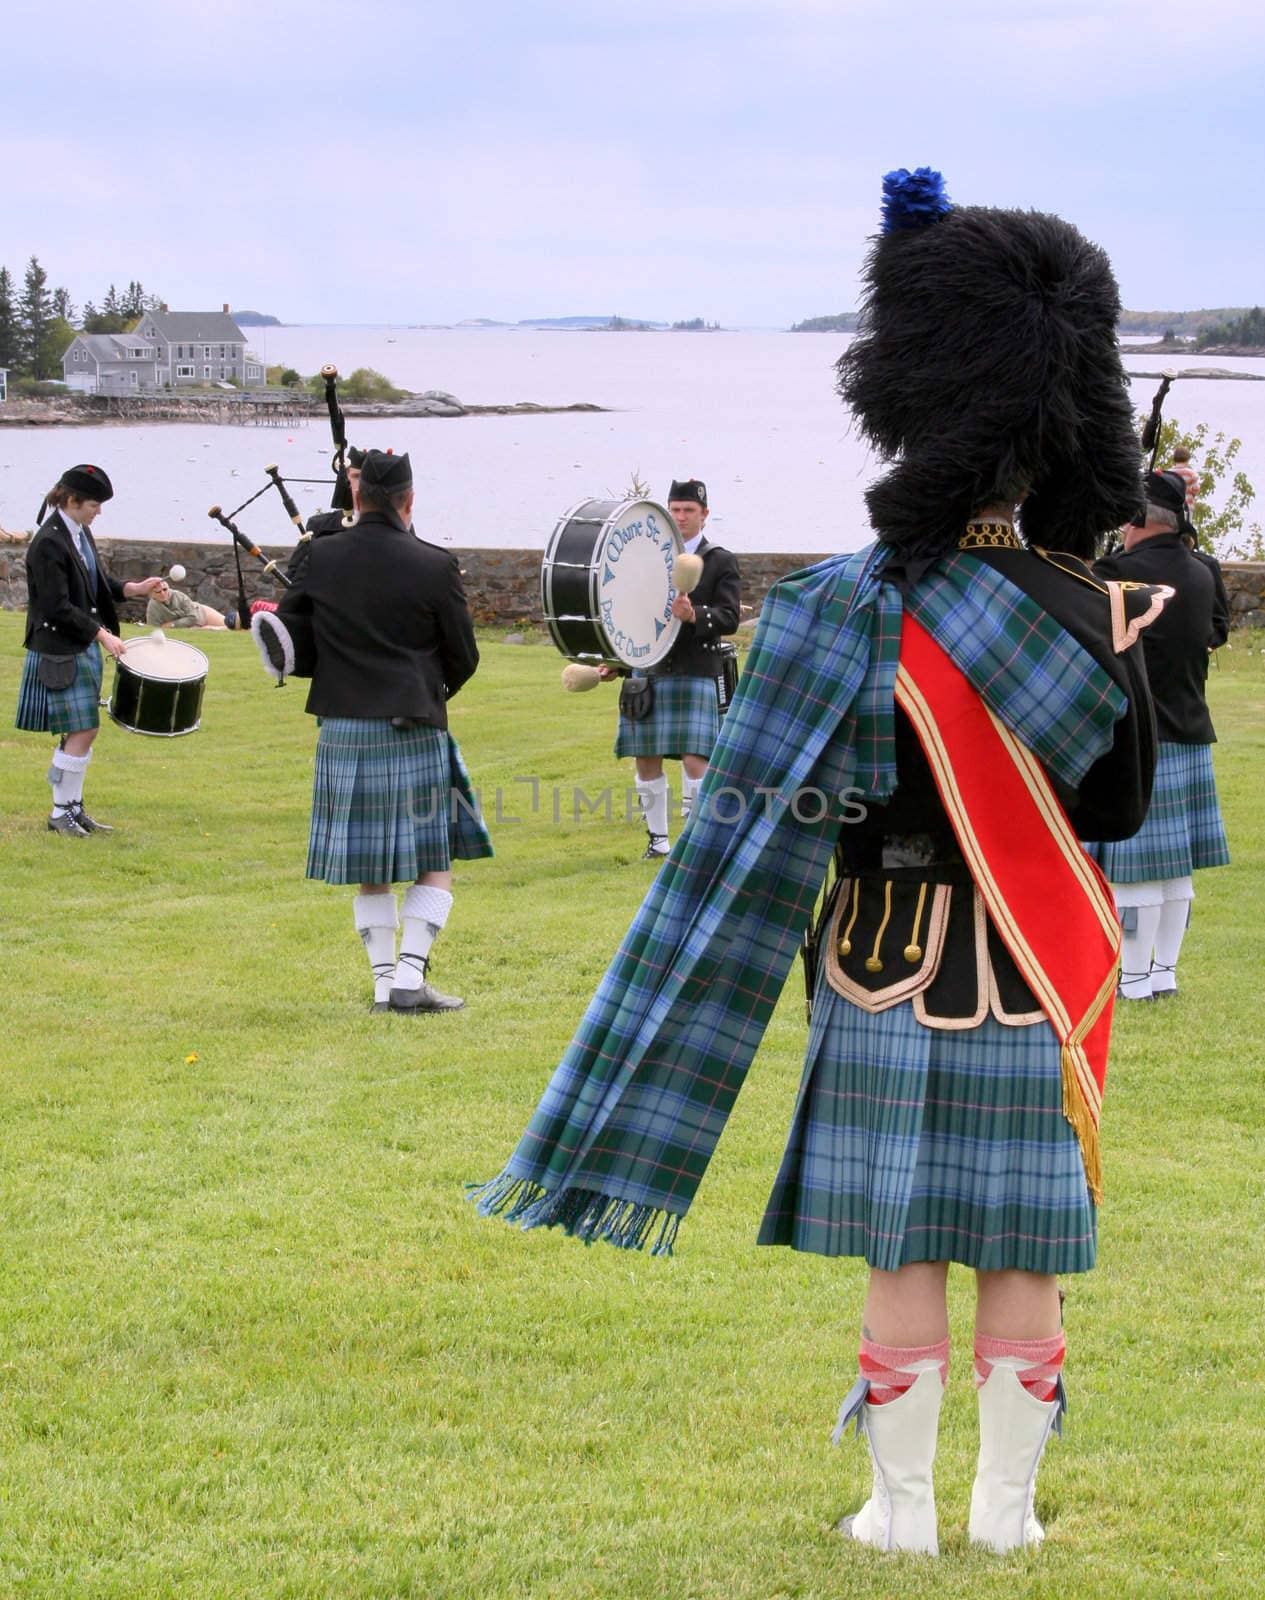 Bagpipers at the Ocean Shore #2 by loongirl